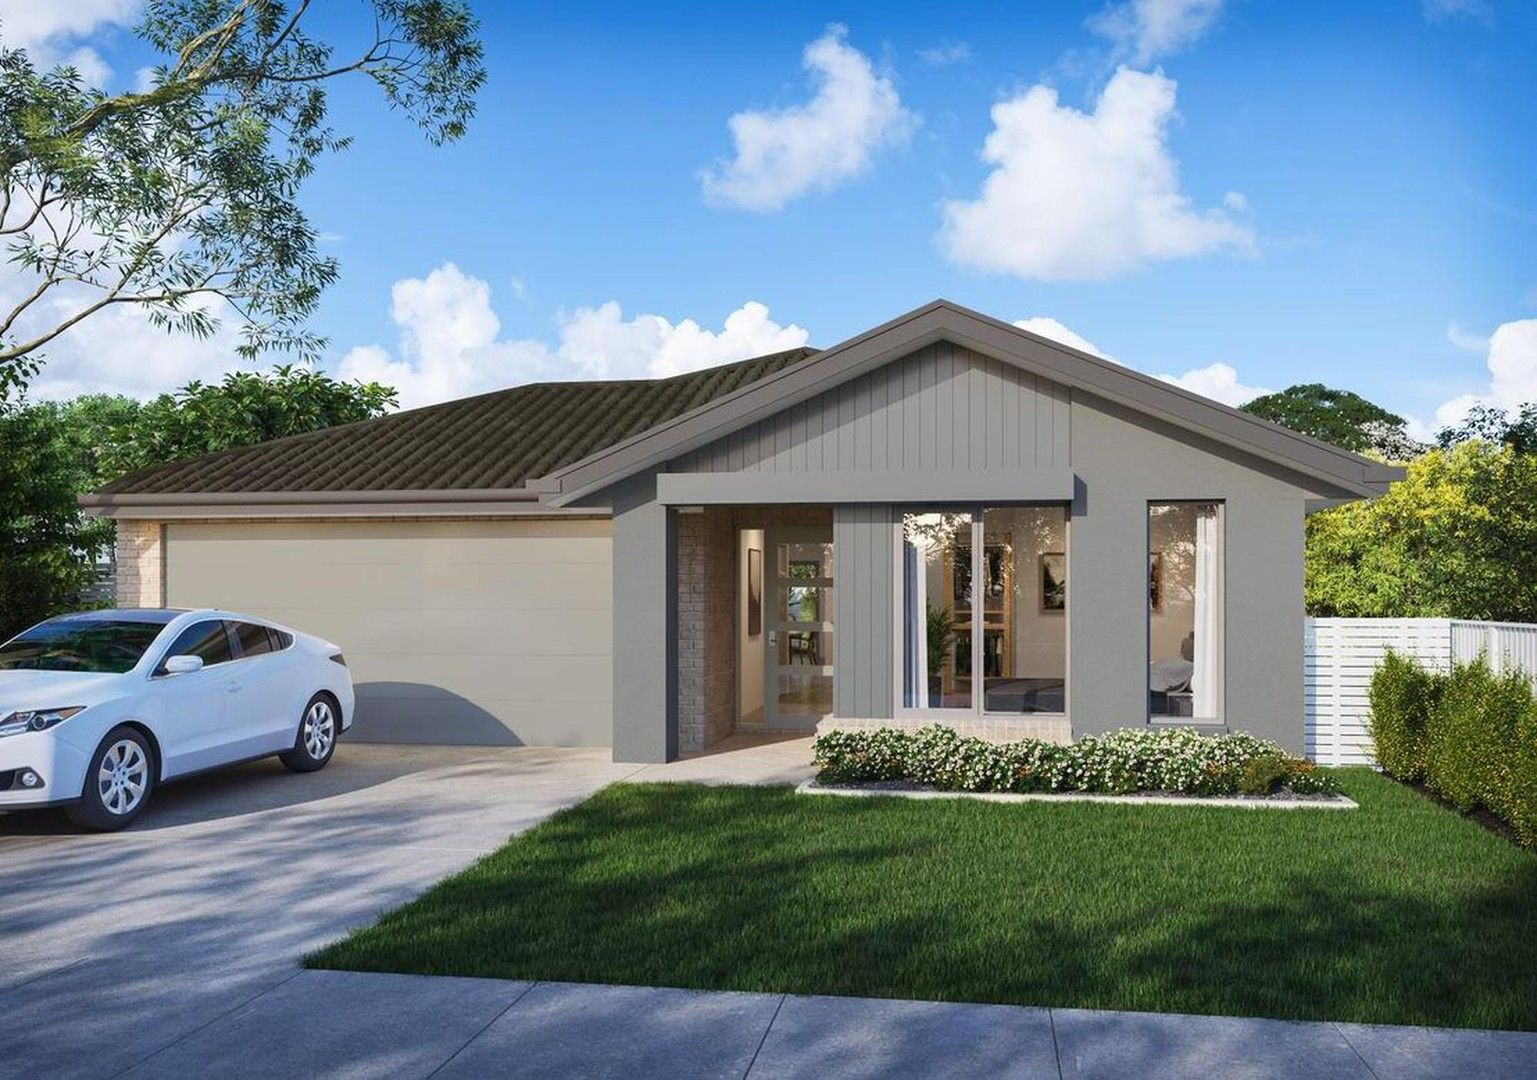 4 bedrooms New House & Land in 587 McCallum Parade GAWLER EAST SA, 5118